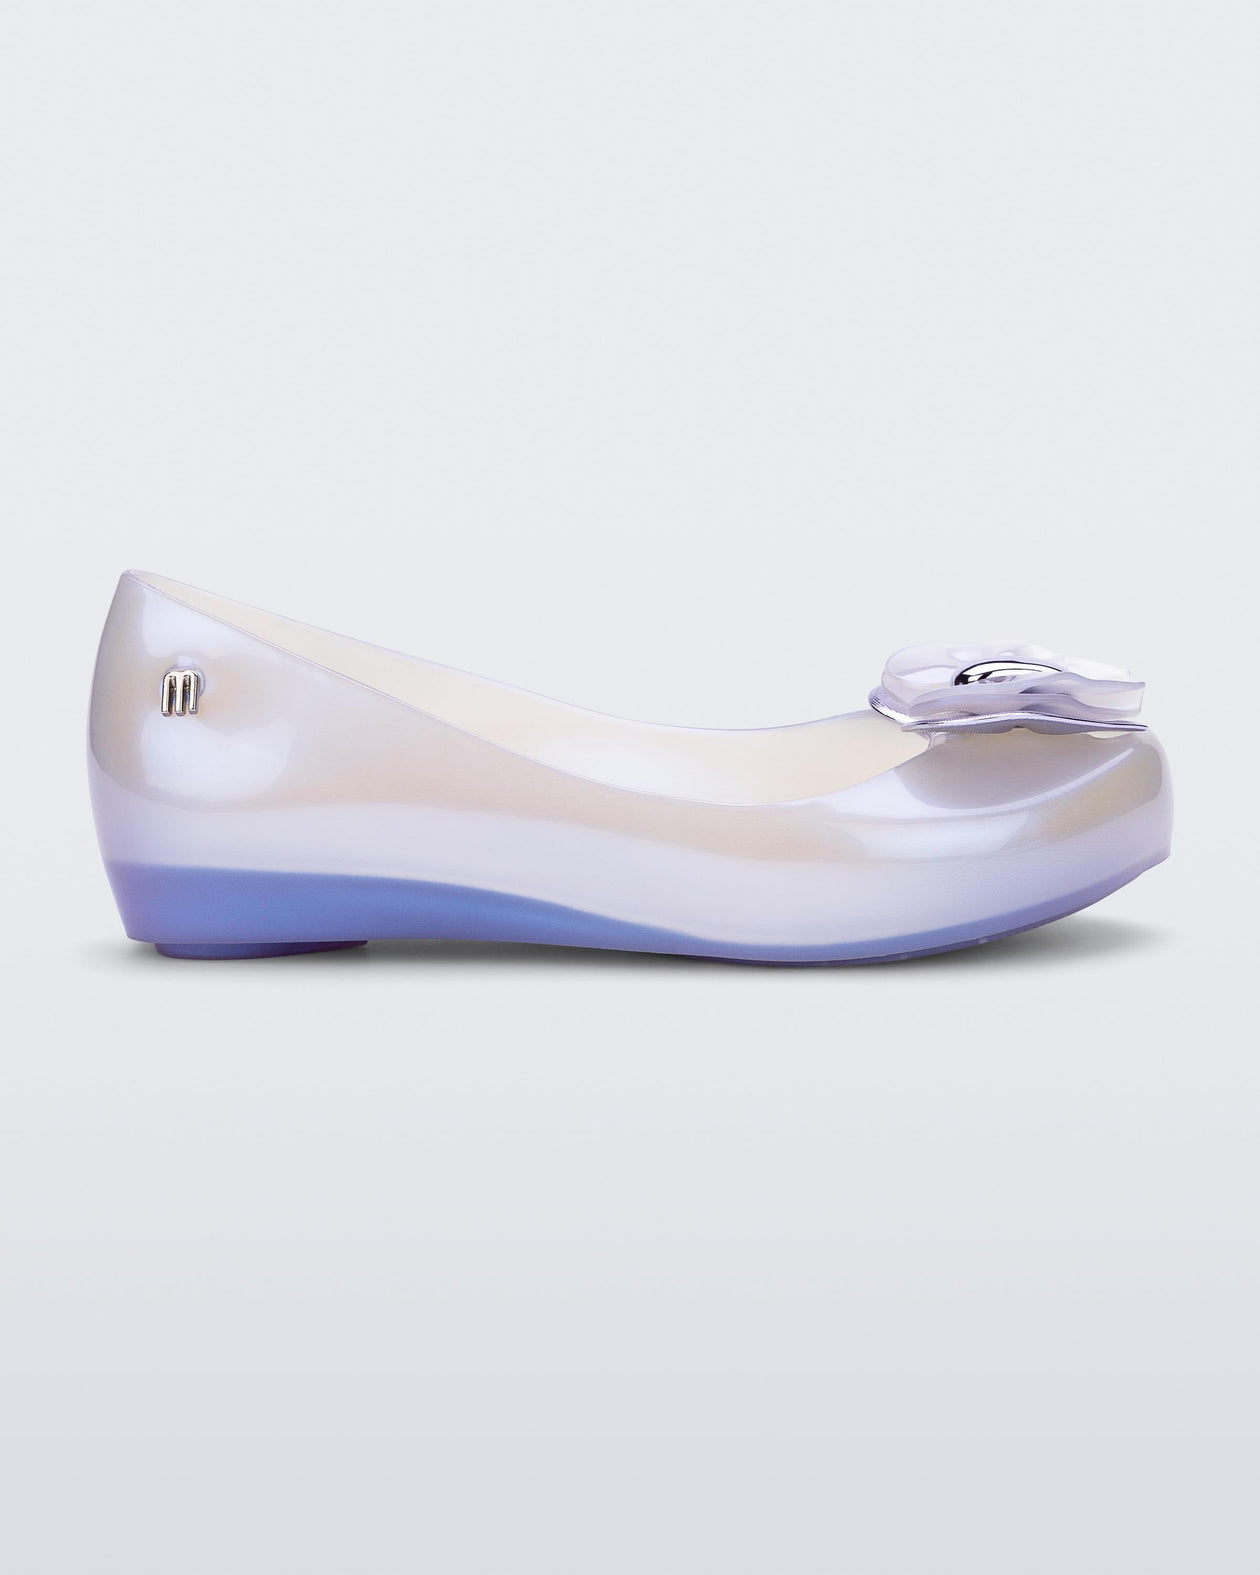 Side view of a pearly blue Mini Melissa Ultragirl flat with a pearly blue base and a heart buckle bow detail on the toe.